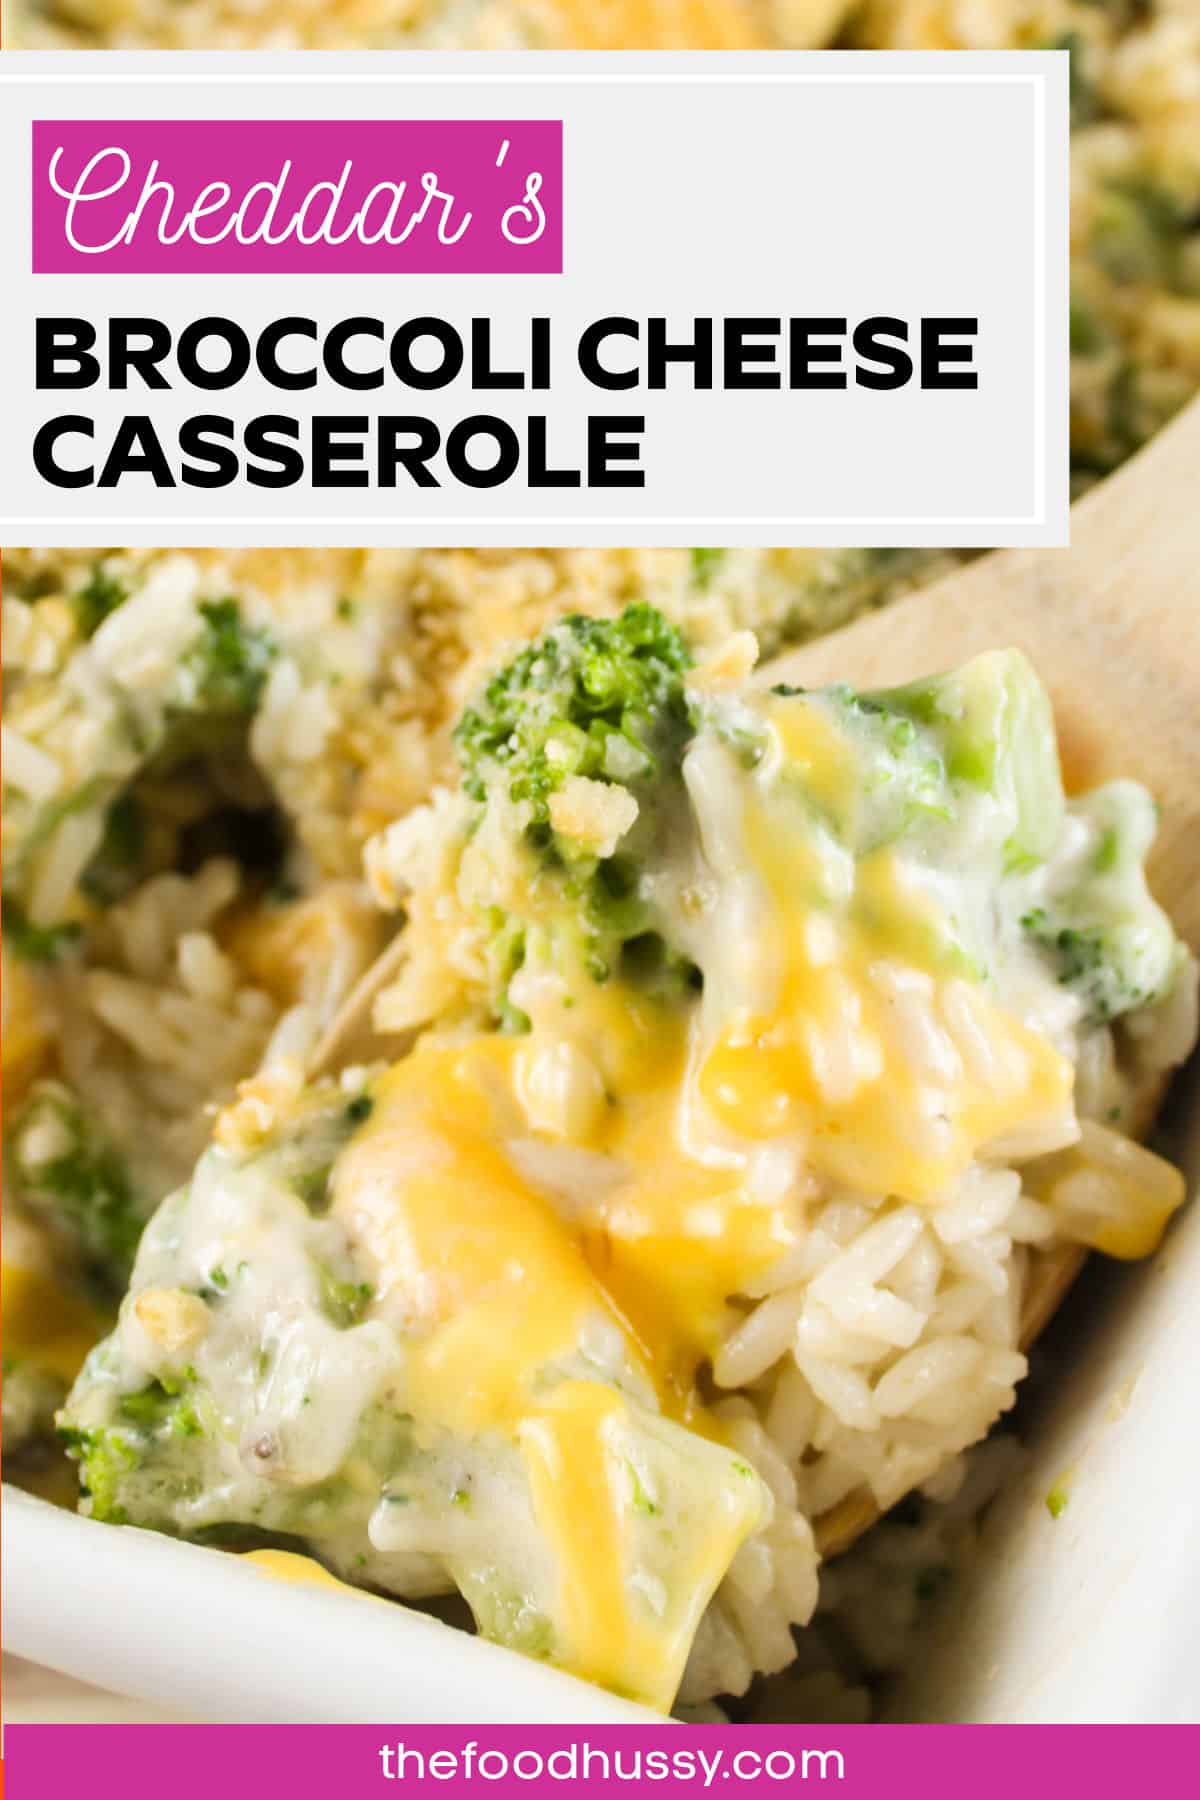 Cheddars Broccoli Cheese Casserole is a delicious and easy-to-make side dish for weeknights or any holiday table! Loaded with broccoli, rice, Velveeta and - of course - a little butter! ;-)  via @foodhussy